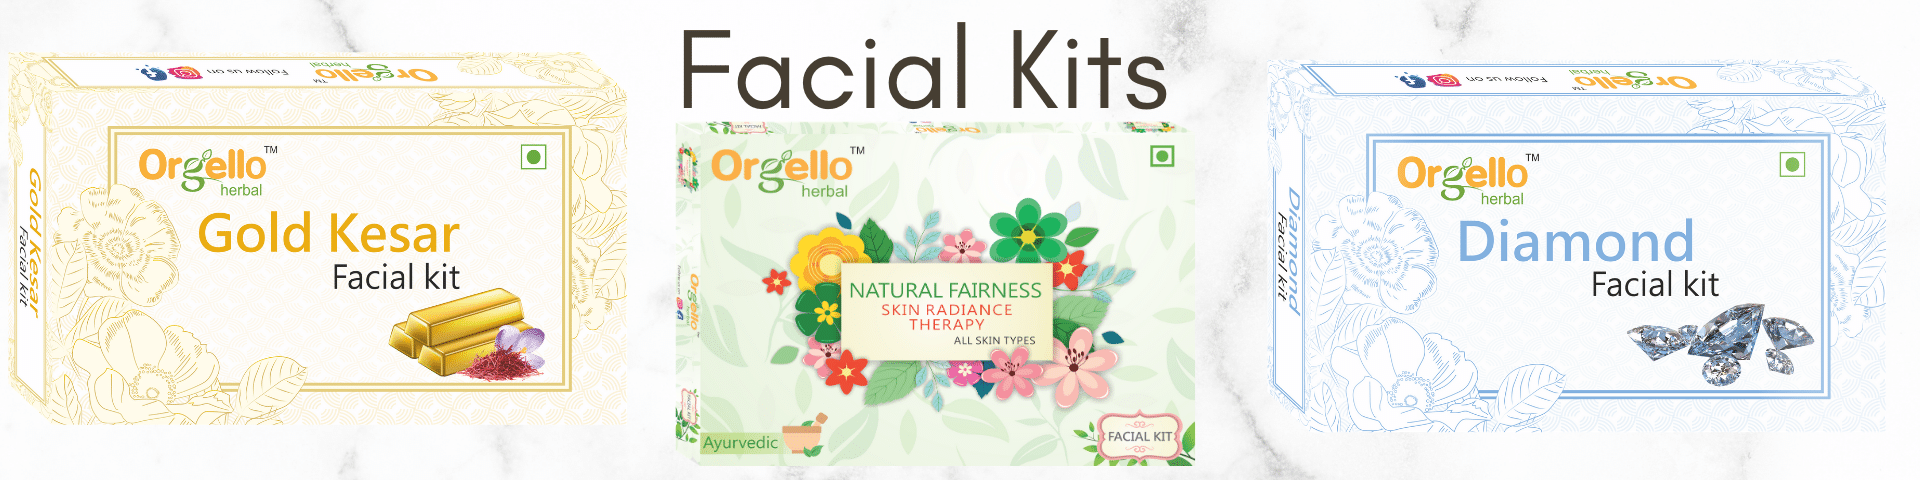 Faciak kit banner for product page